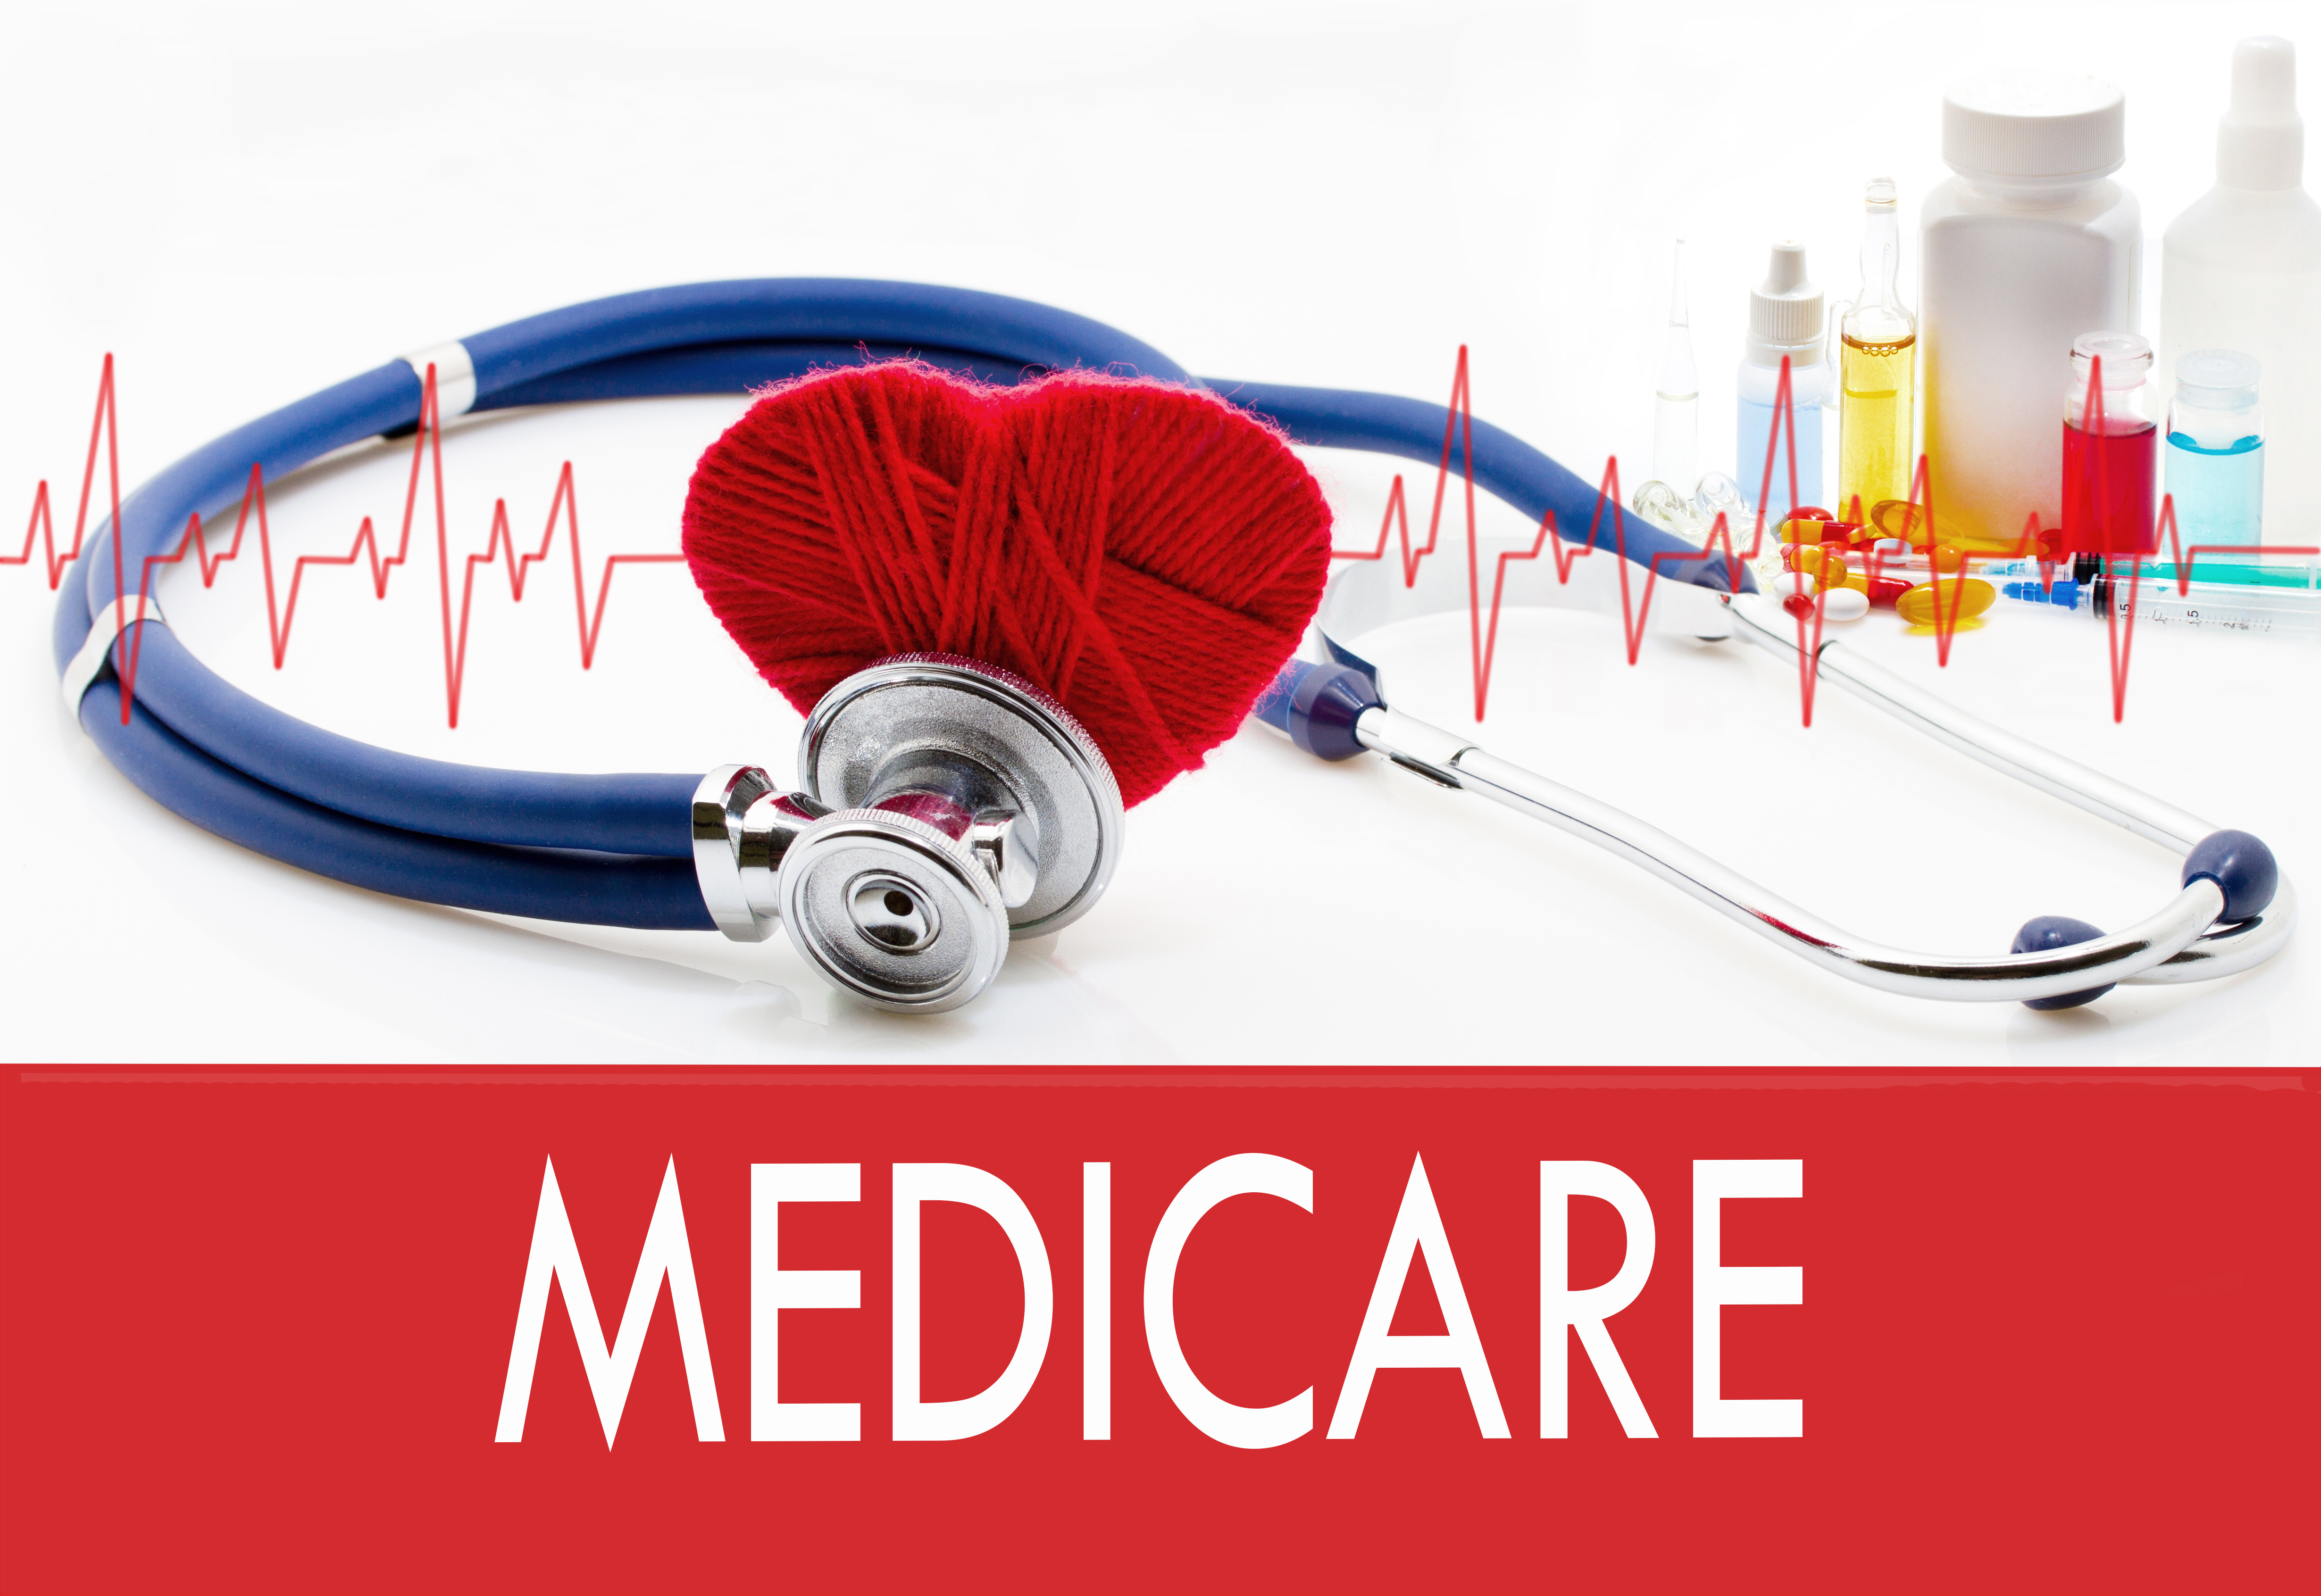 image if stethoscope pressed against a heart form wrapped in red yarn and an EKG heart rhythm going through it. The word "Medicare" in capital letters at the bottom of picture